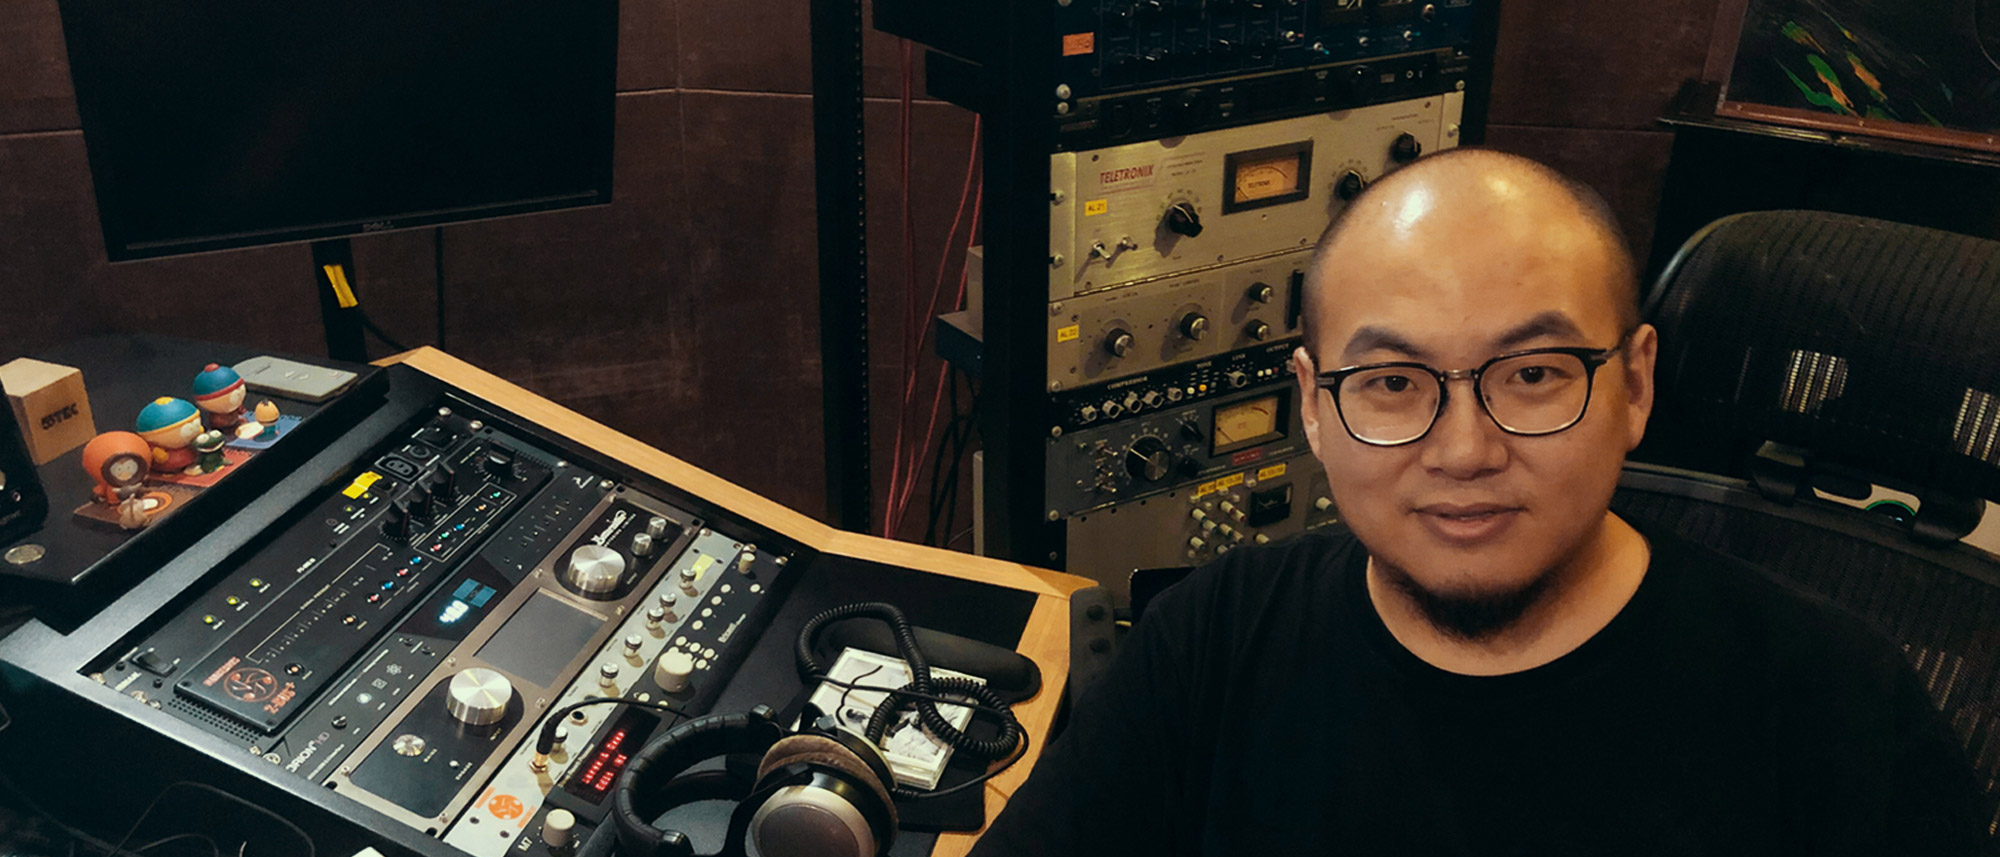 Big J on Orion32 HD – “It’s one of the most important pieces of gear in my mixing chain”